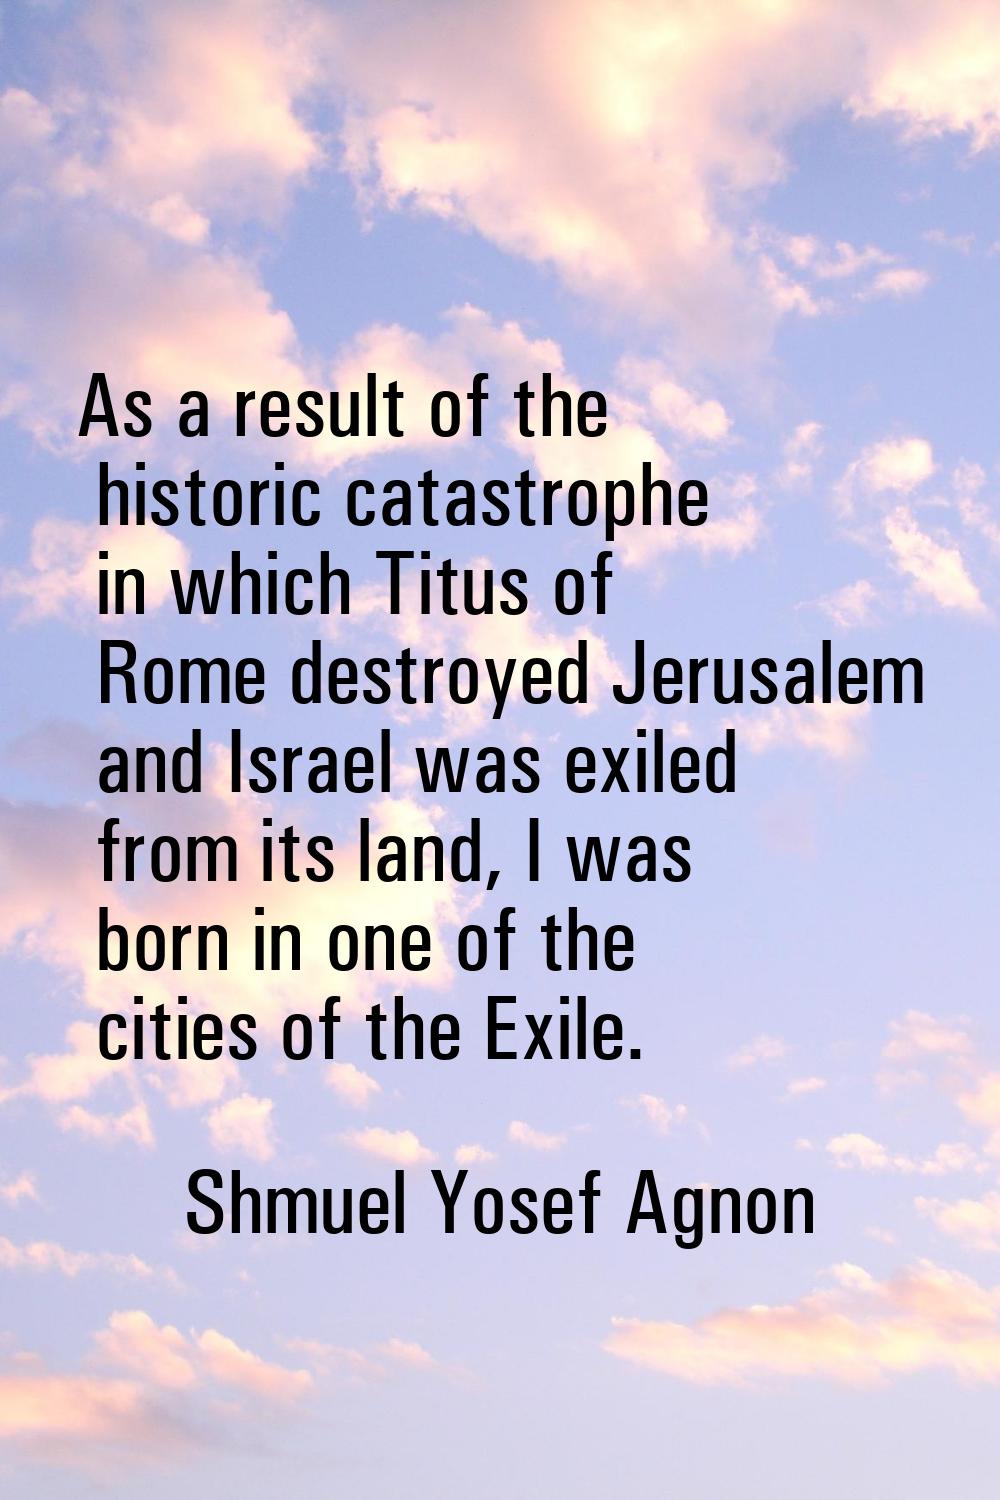 As a result of the historic catastrophe in which Titus of Rome destroyed Jerusalem and Israel was e